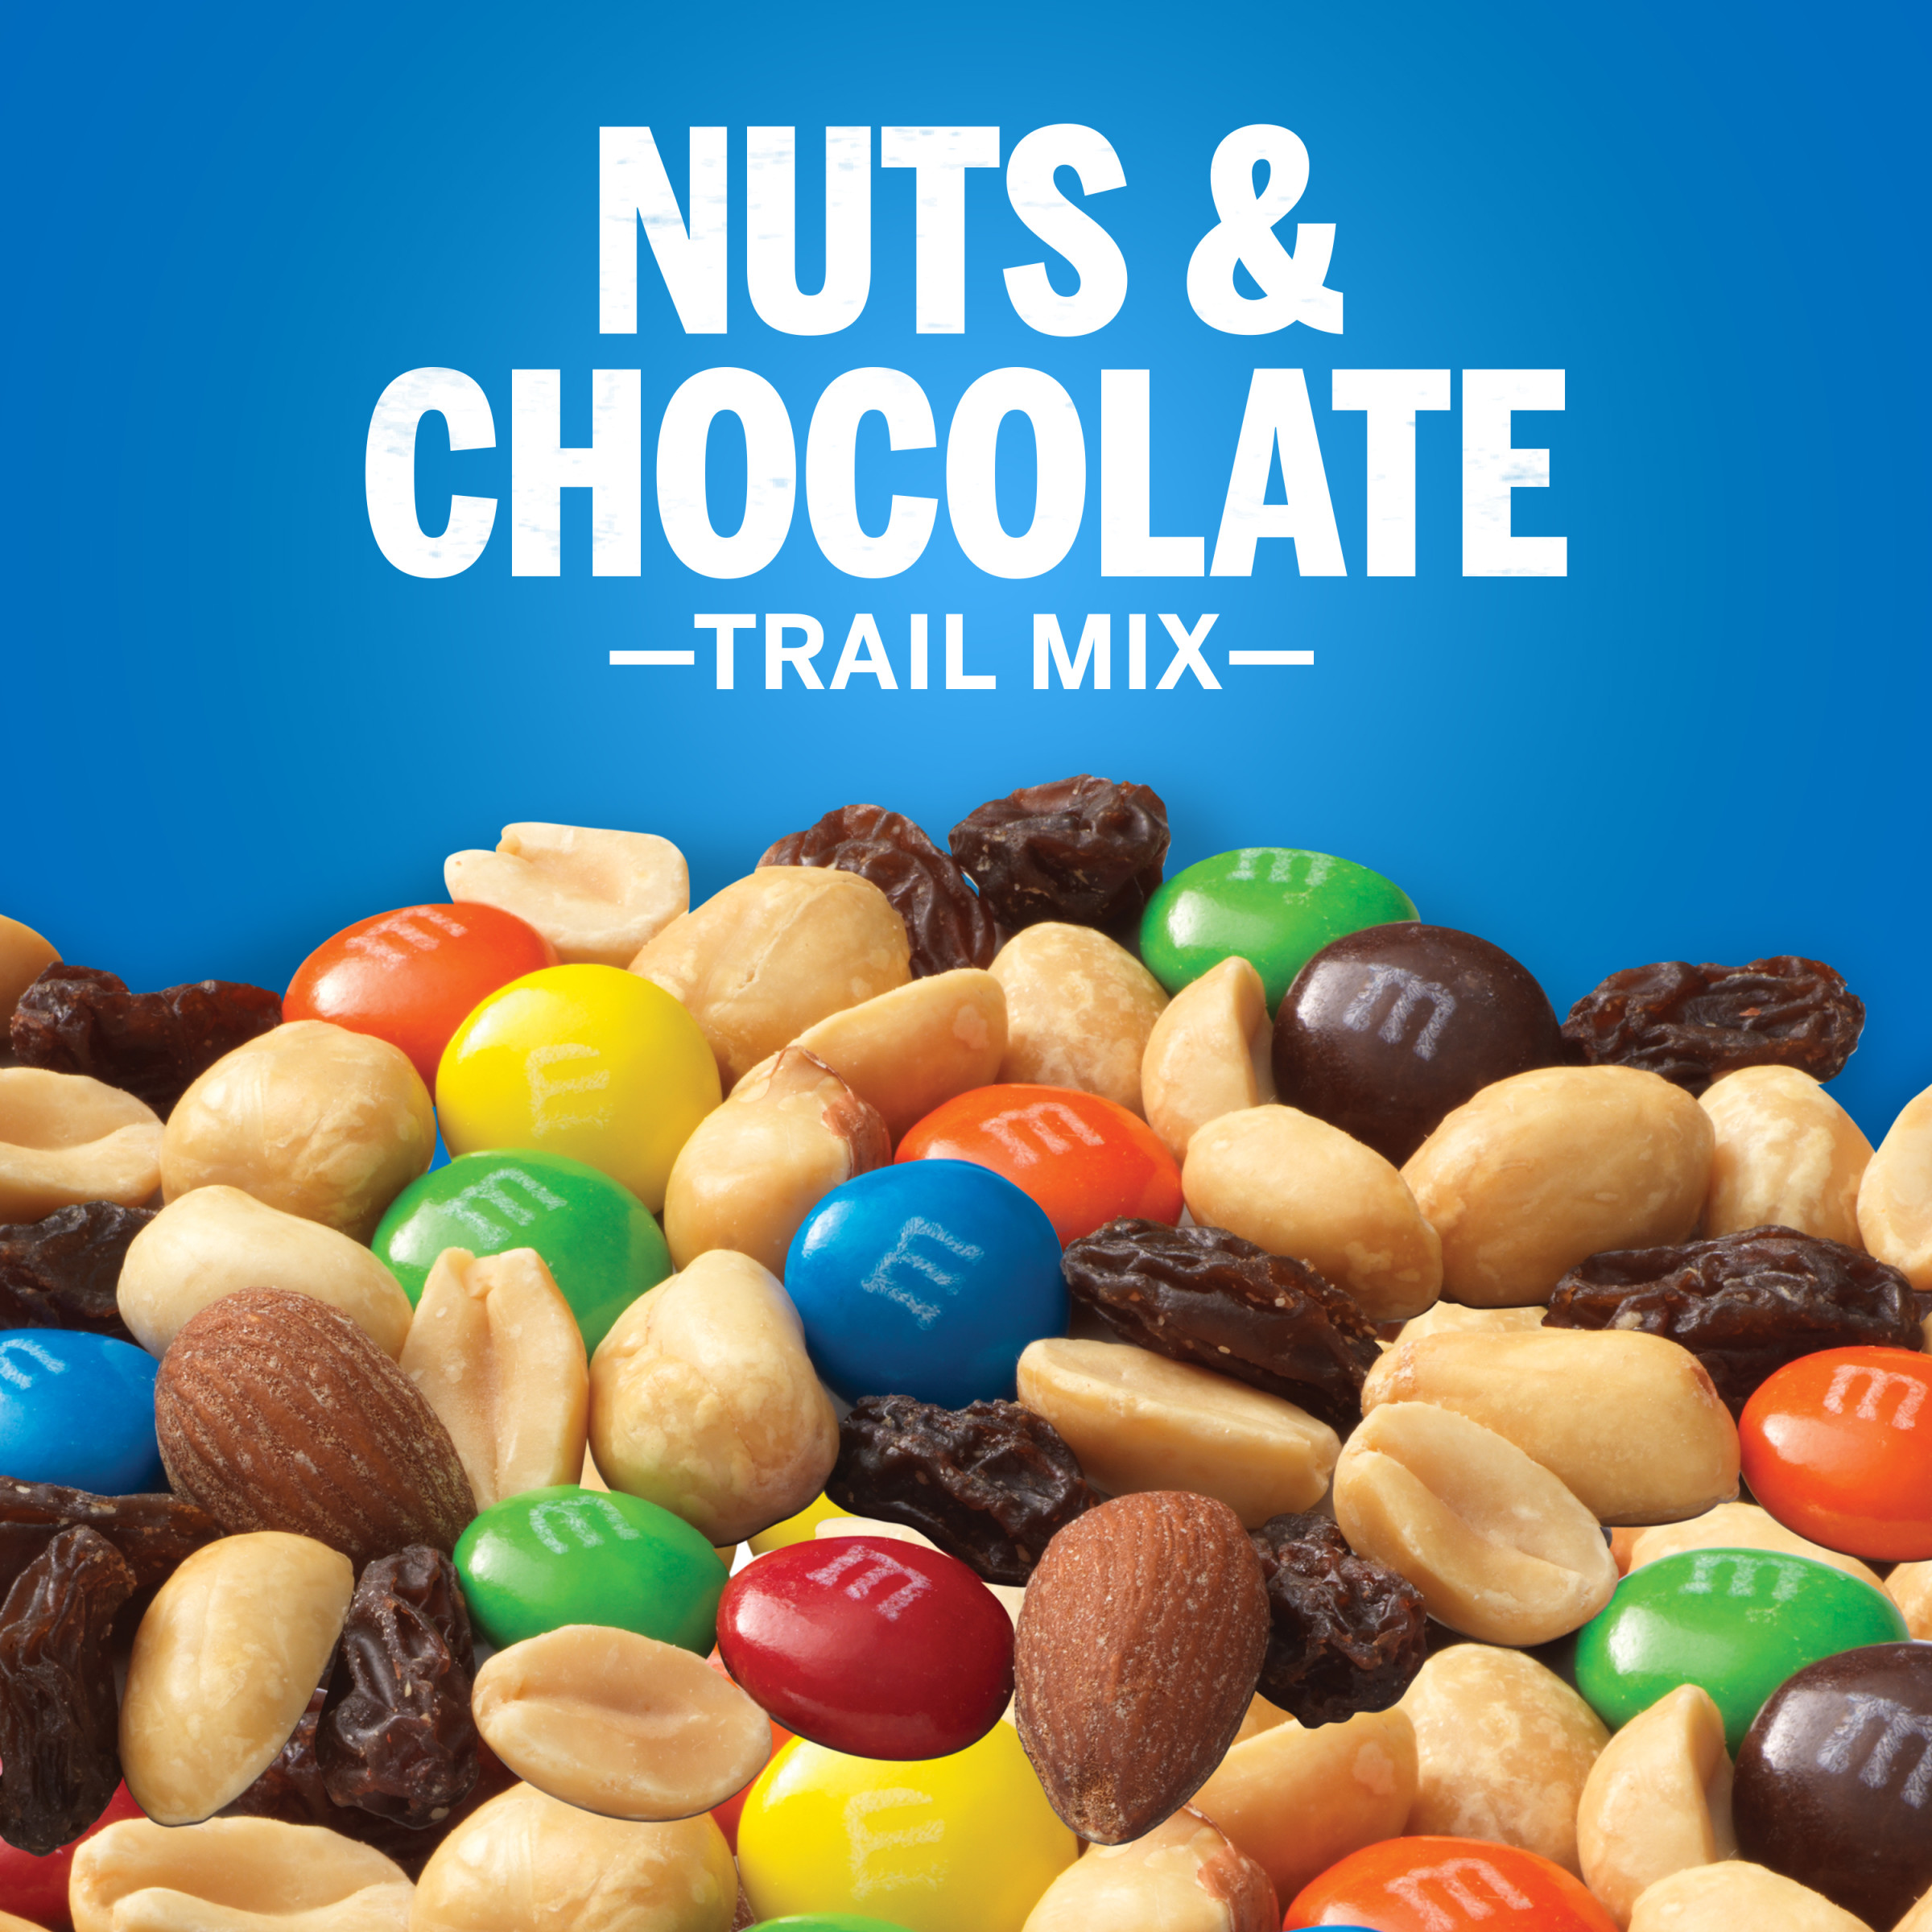 Planters Nuts & Chocolate Trail Mix with Roasted Peanuts, M&M Chocolate Candies, Raisins & Roasted Almonds, 1.19 lb Bag - image 2 of 14